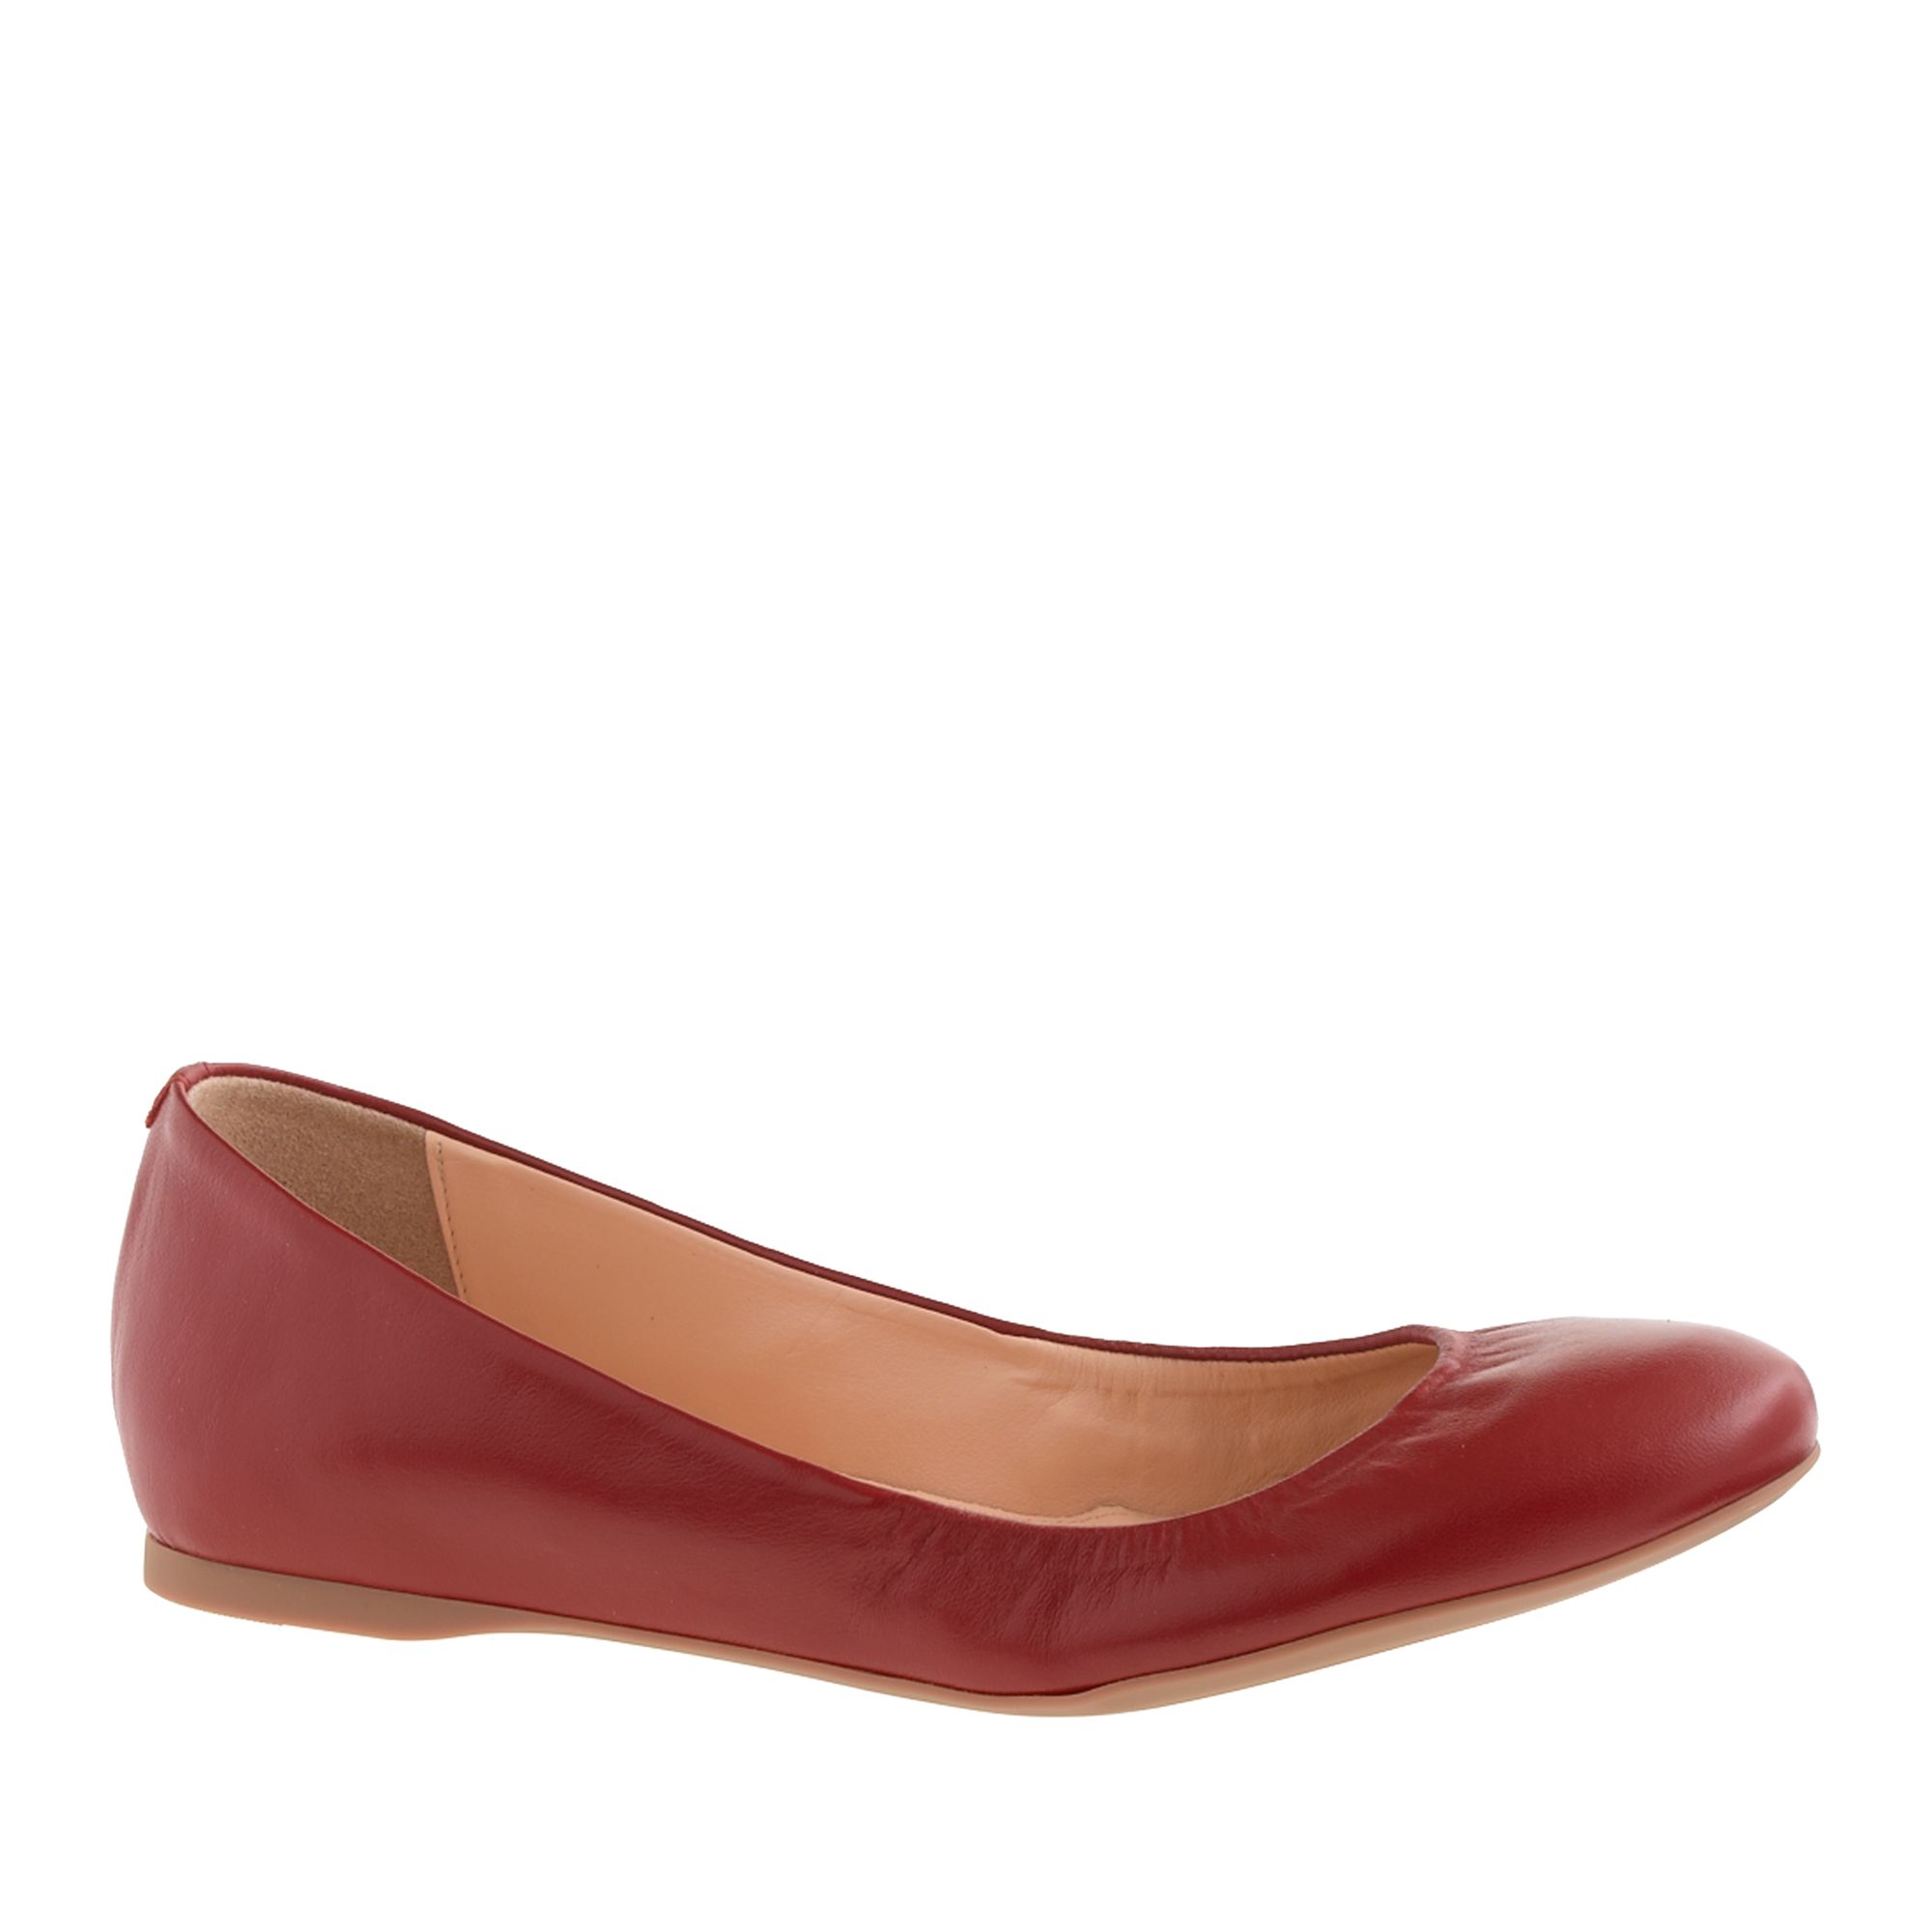 J.crew Cece Leather Ballet Flats in Red | Lyst